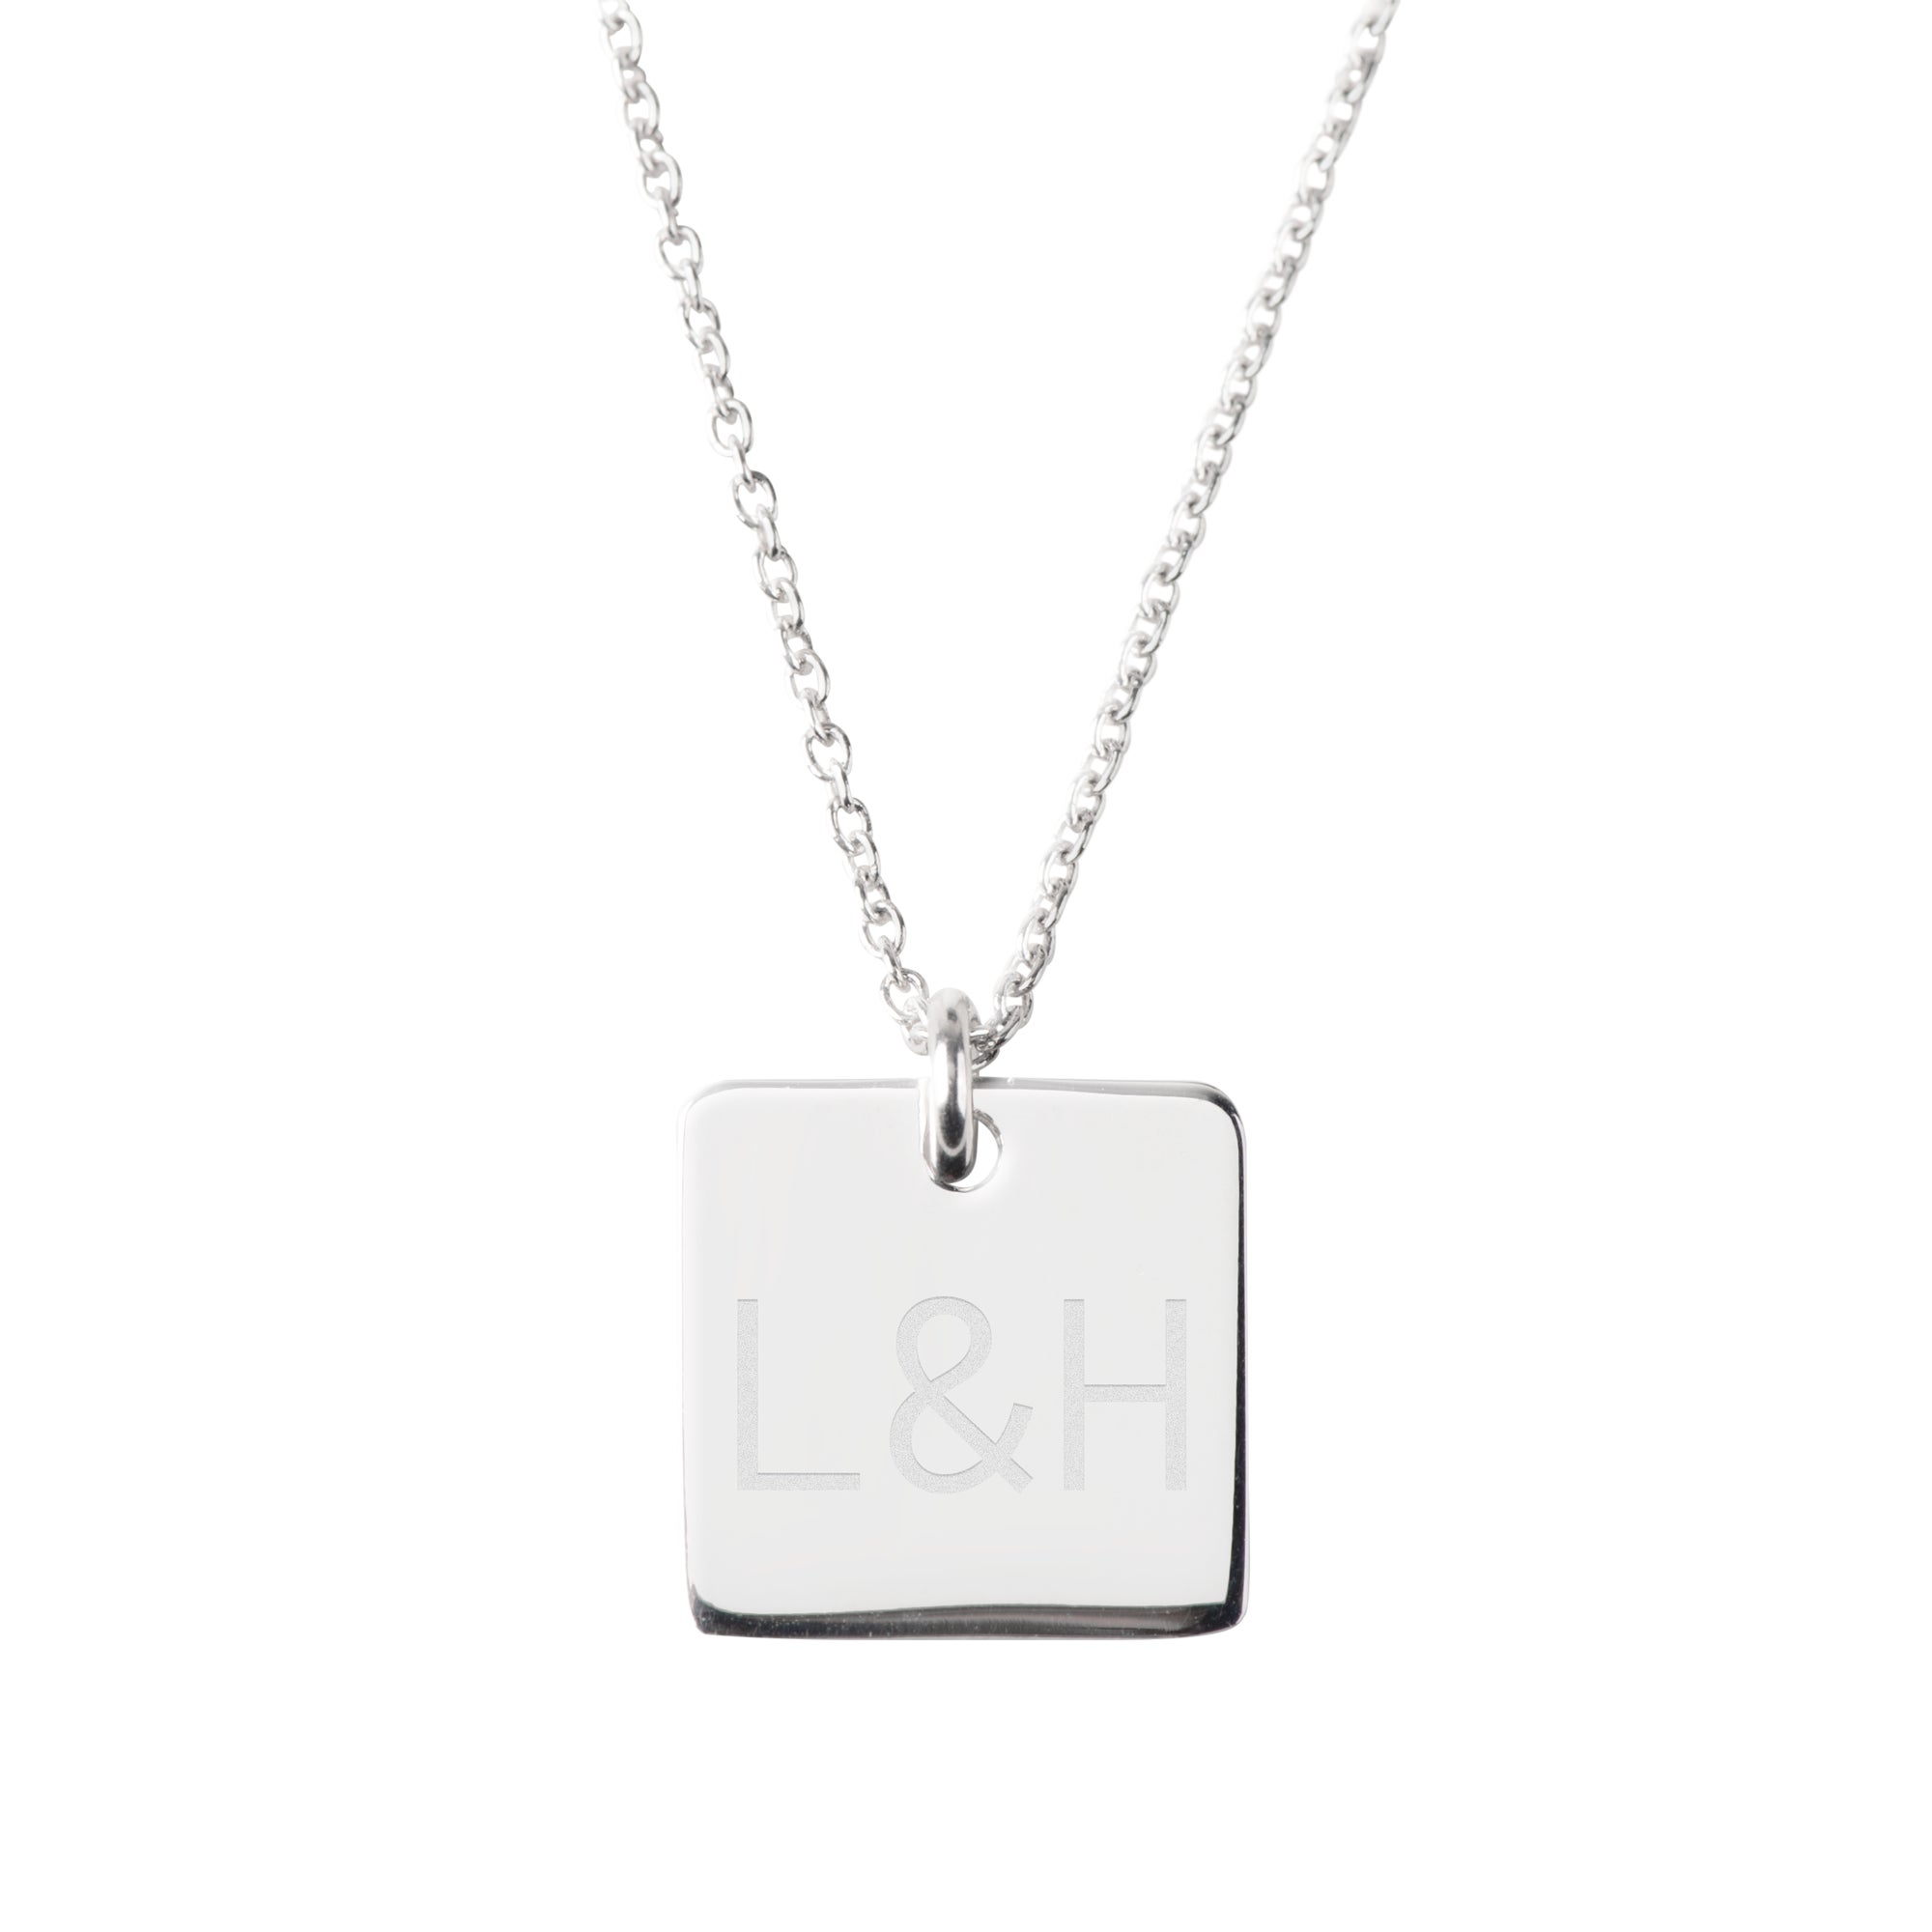 Silver chain with engraving - Square pendant